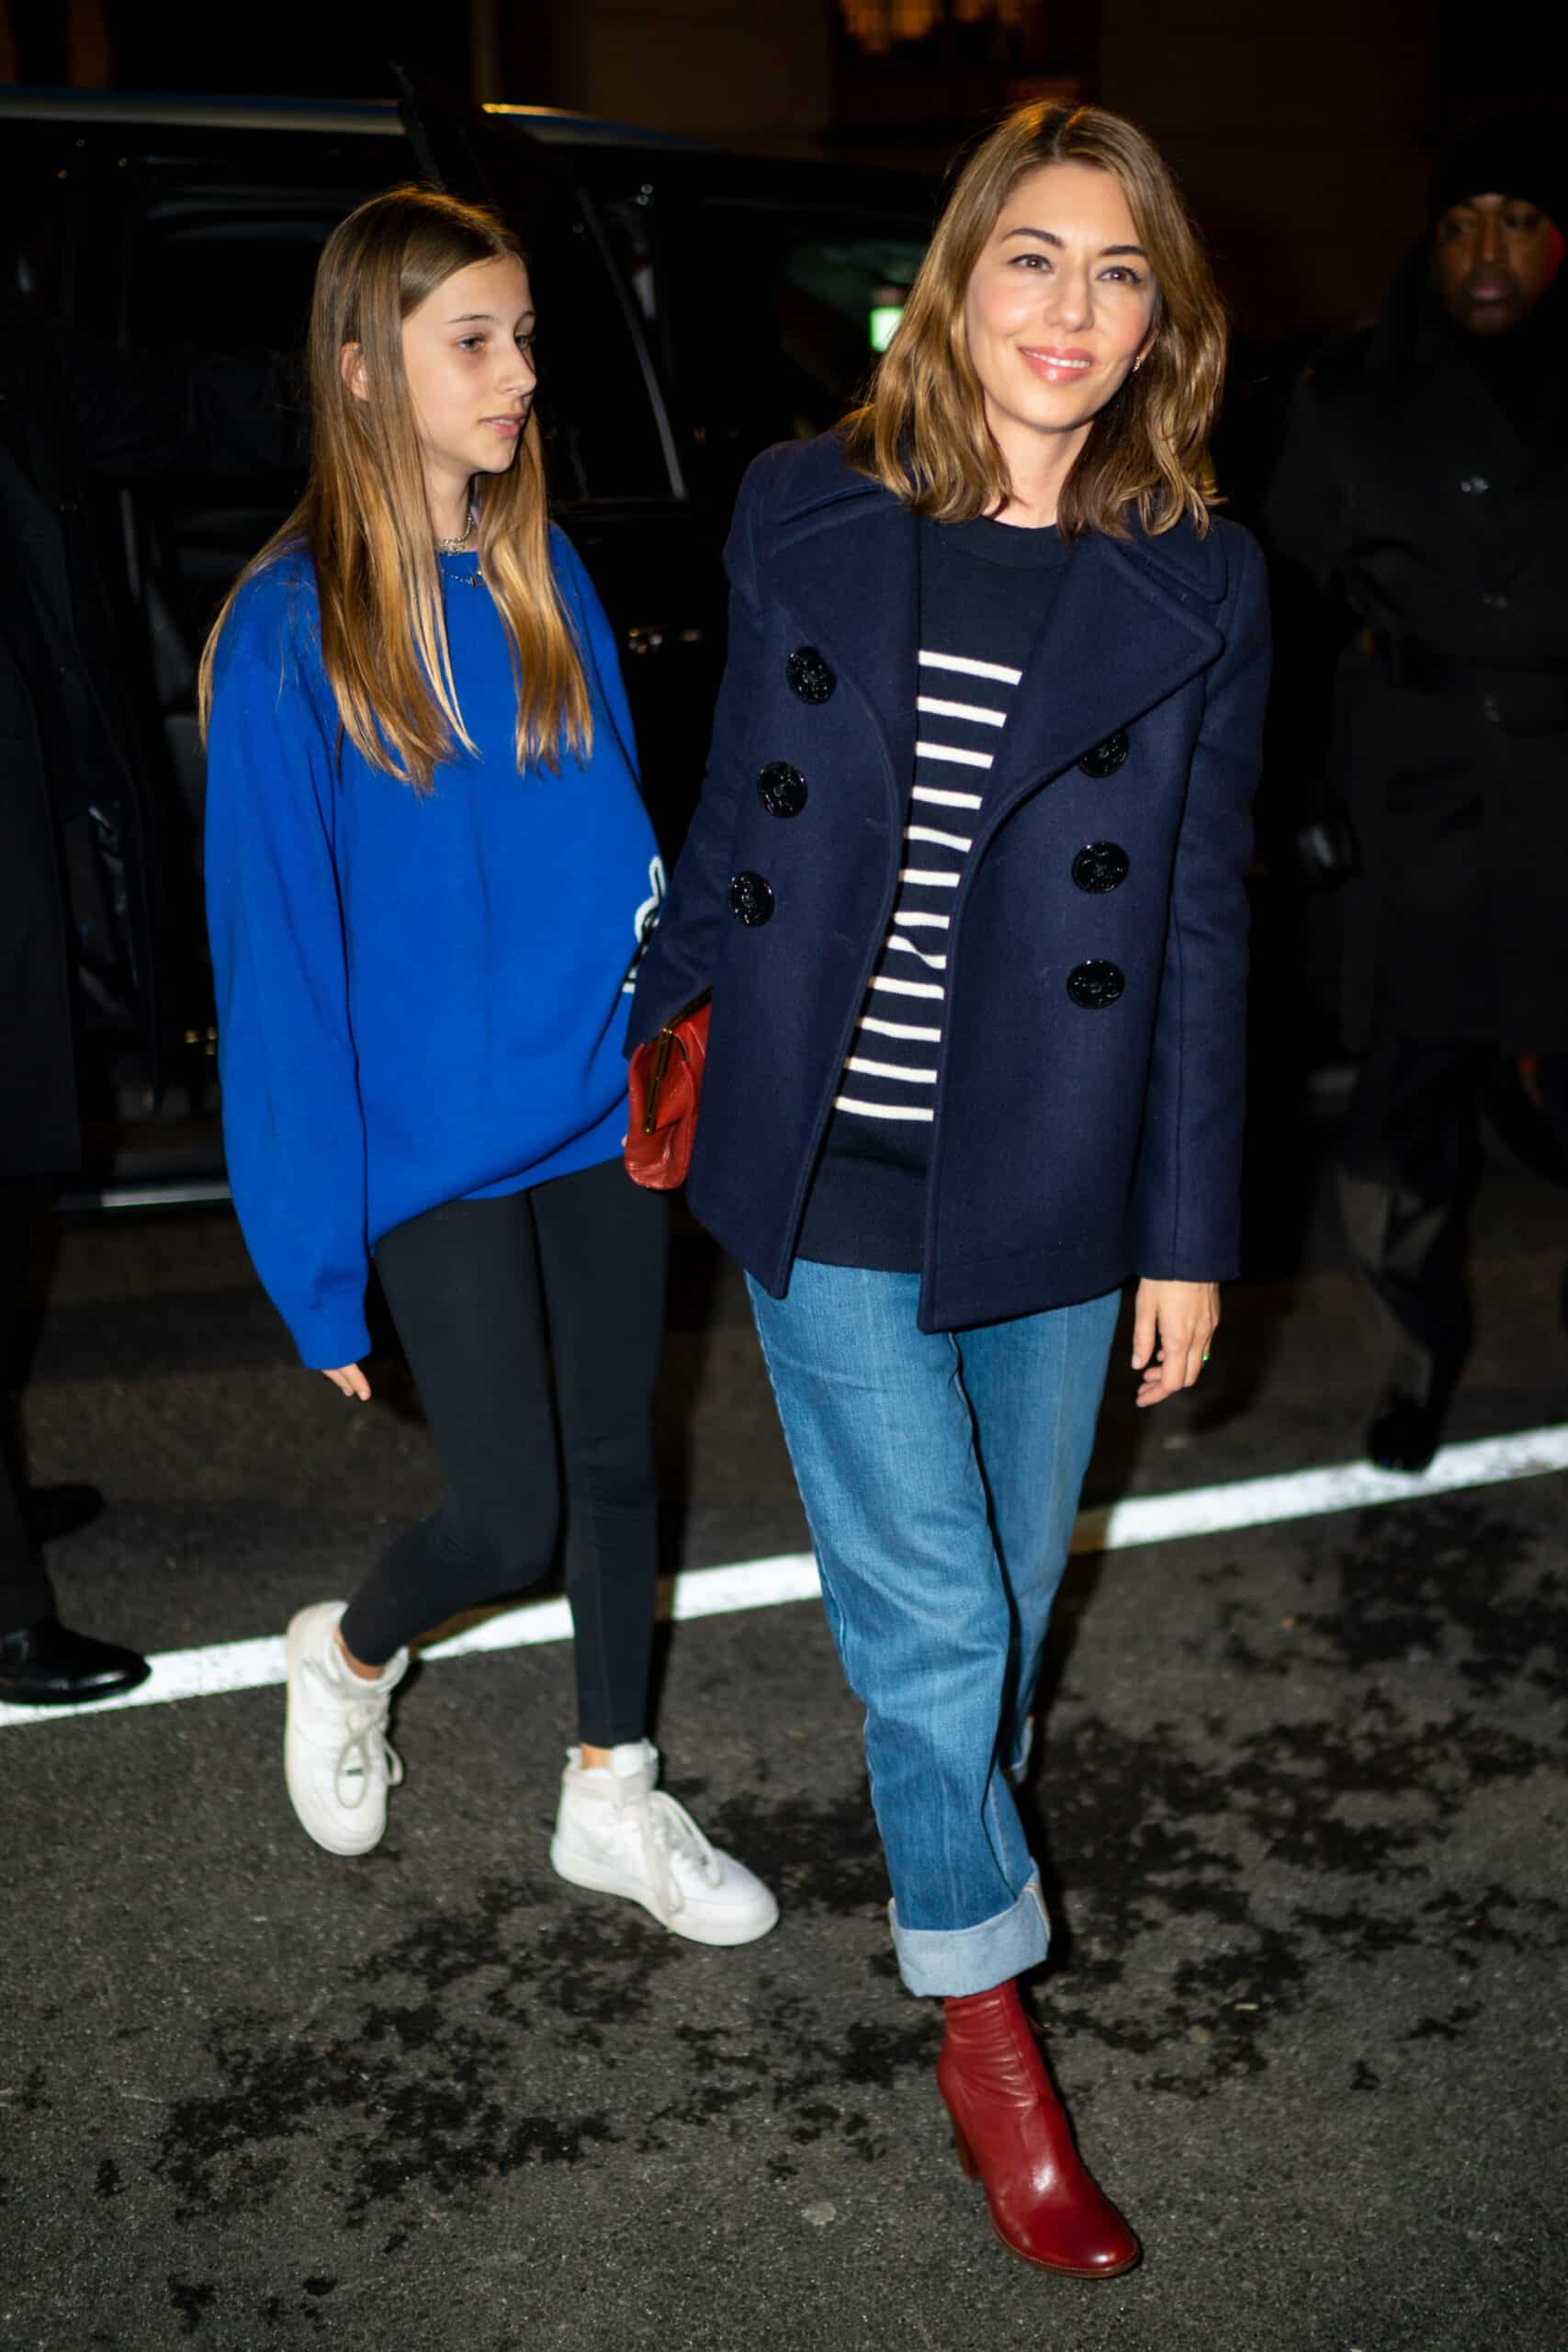 NEW YORK, NEW YORK - FEBRUARY 12: Romy Mars (L) and Sofia Coppola arrives at the Marc Jacobs fashion show at the Park Avenue Armory on February 12, 2020 in New York City.